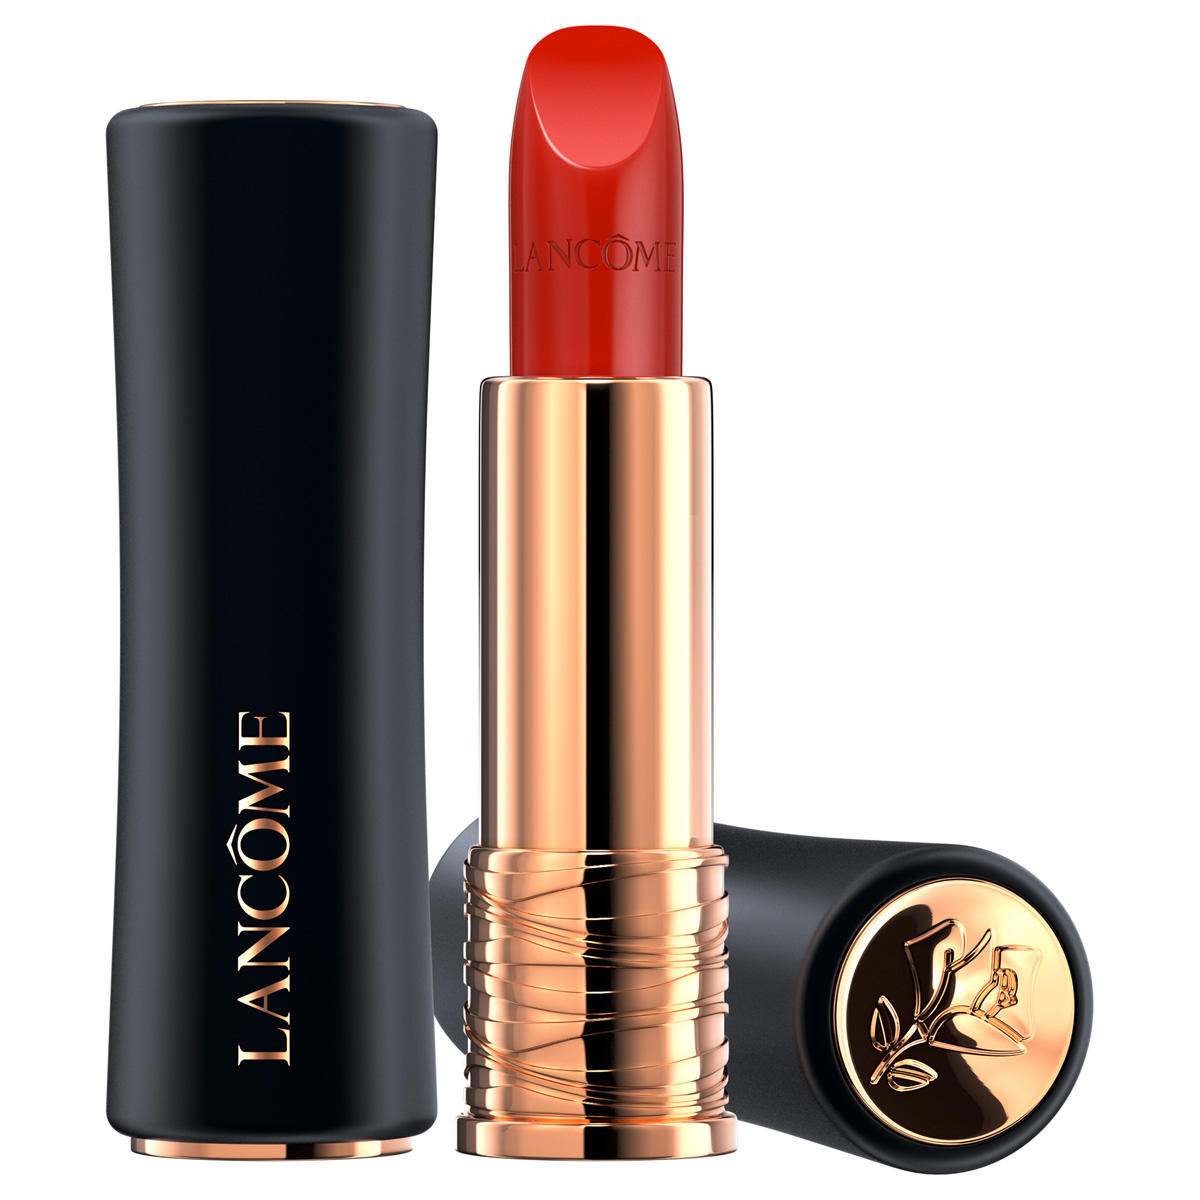 Lancome L'Absolu Rossetto Rouge Cream 118 French-Cœur 3,4 g French-Cœur